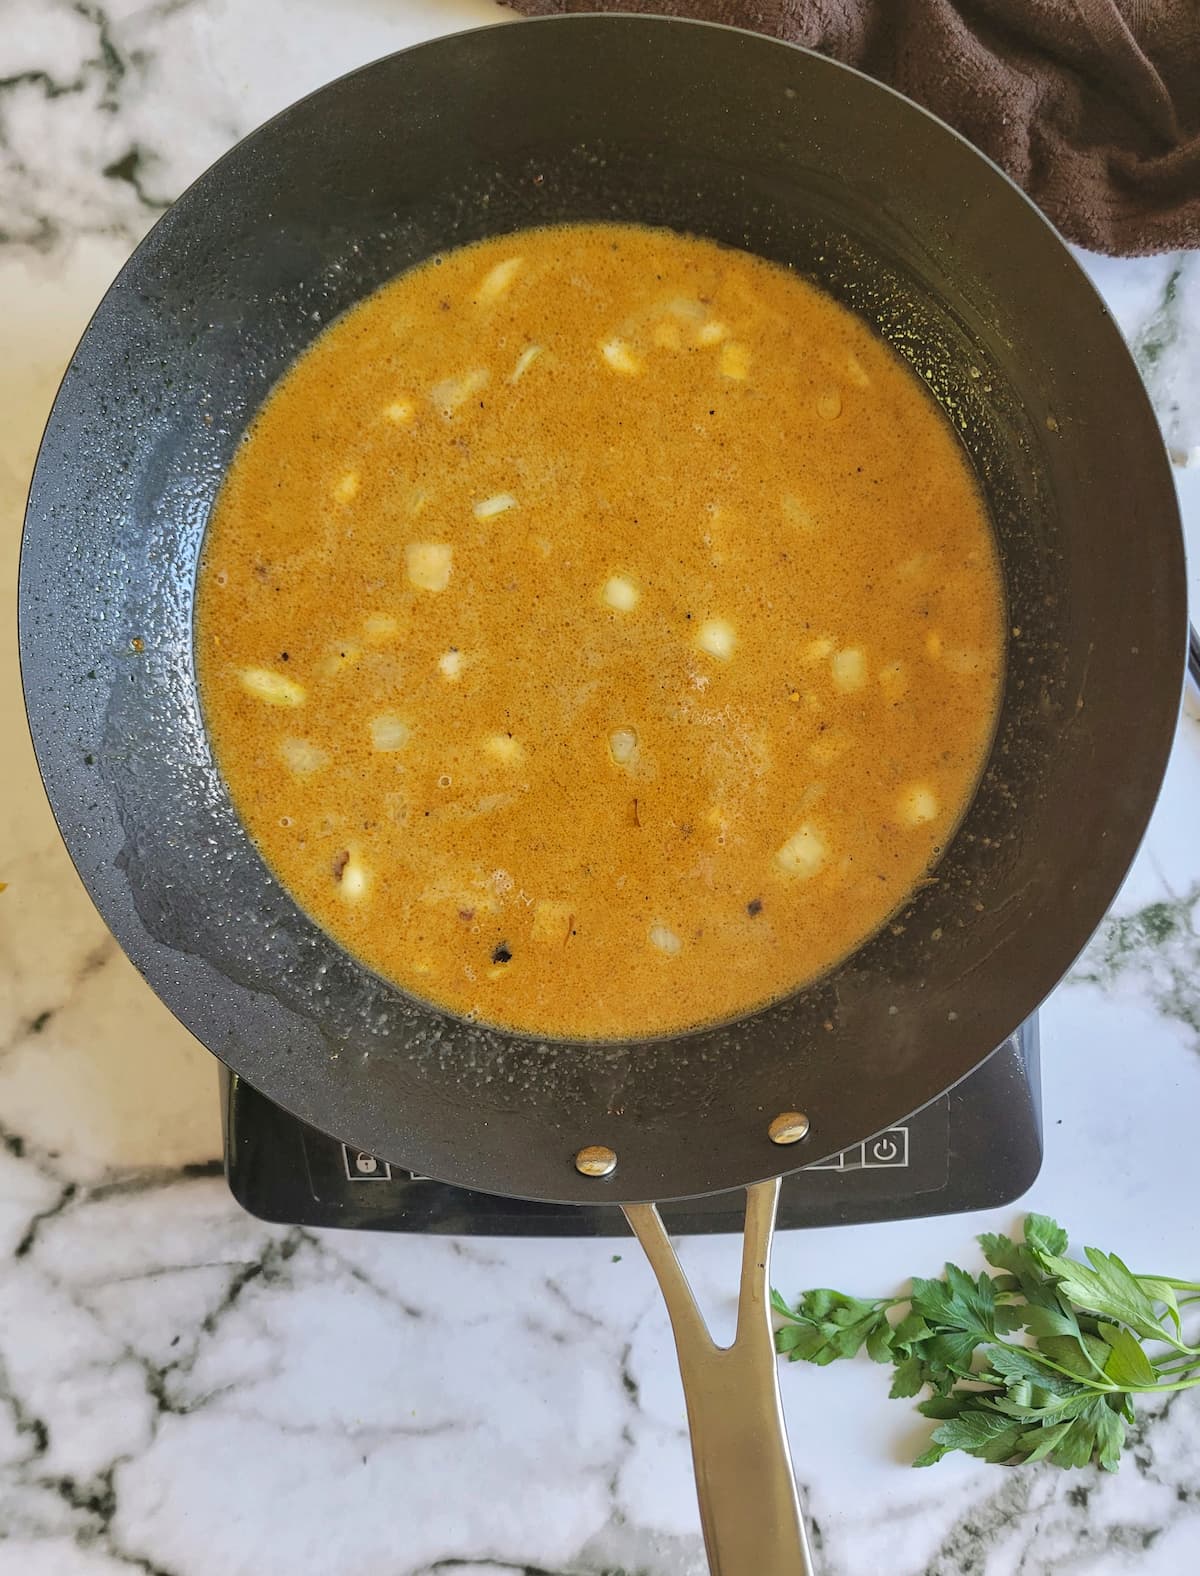 watery orange sauce with diced onions in a pan on a burner